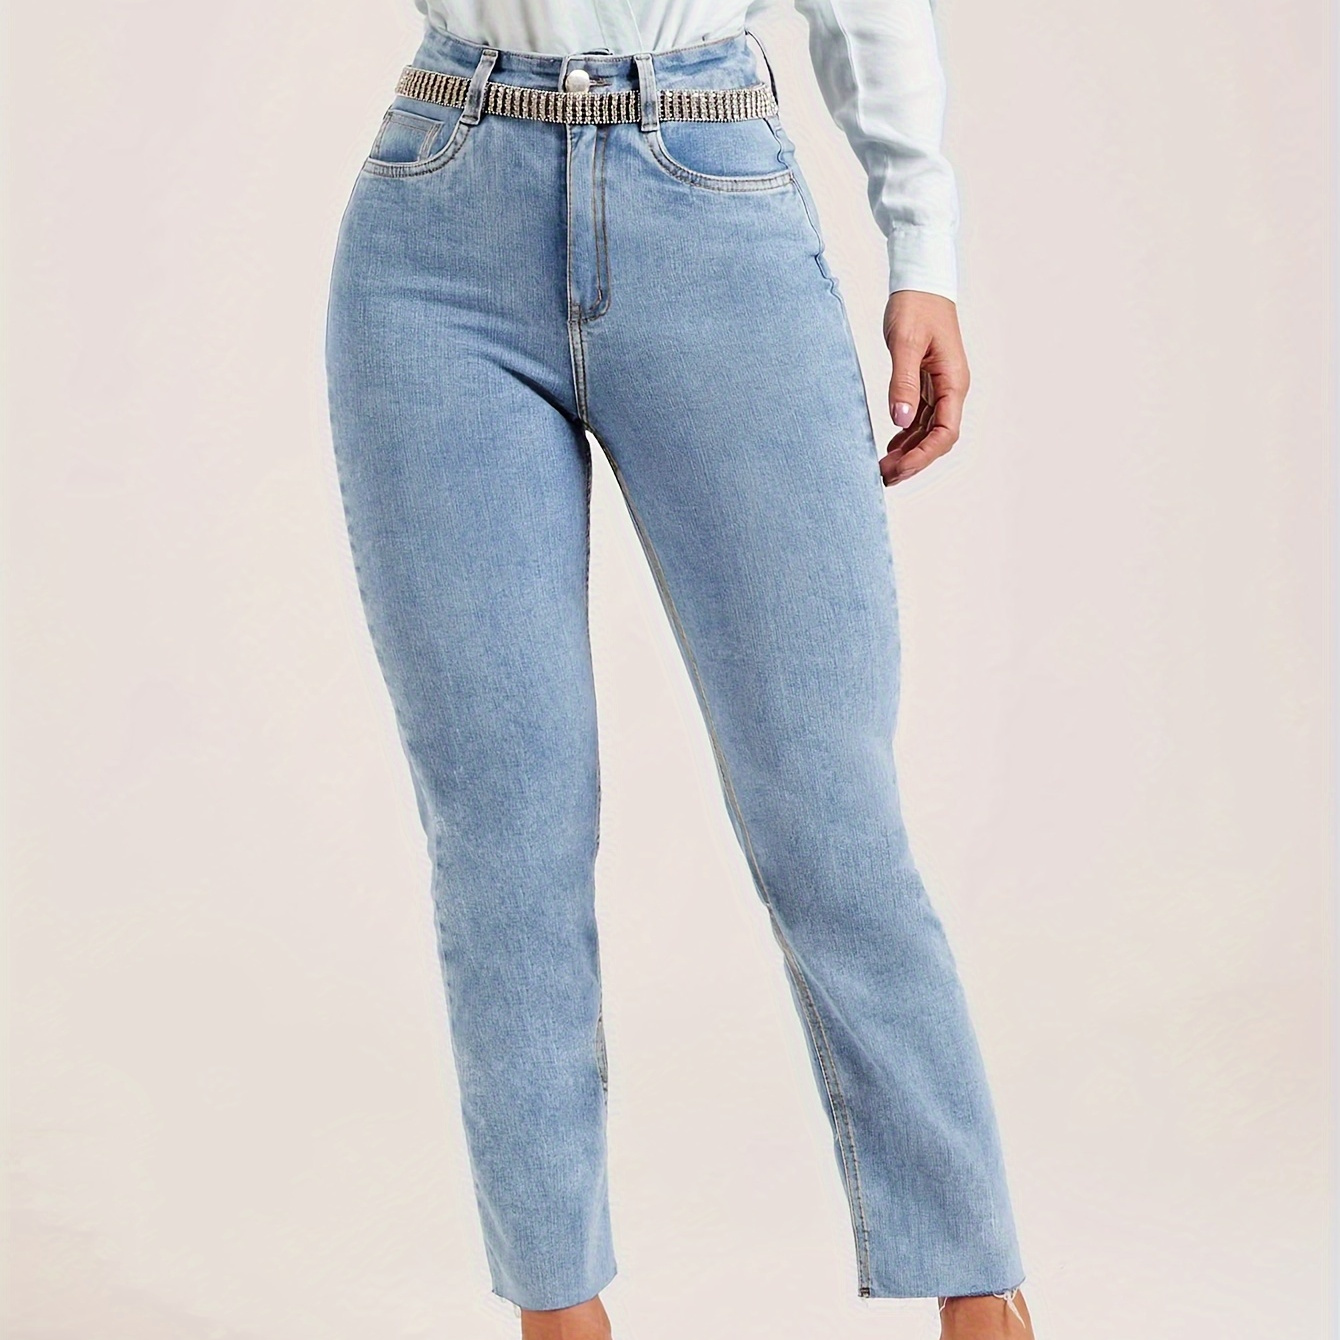 

Raw Cut Medium Strech Slim Fit Cropped Jeans, Solid Washed Blue Casual Denim Pants, Women's Denim Jeans & Clothing